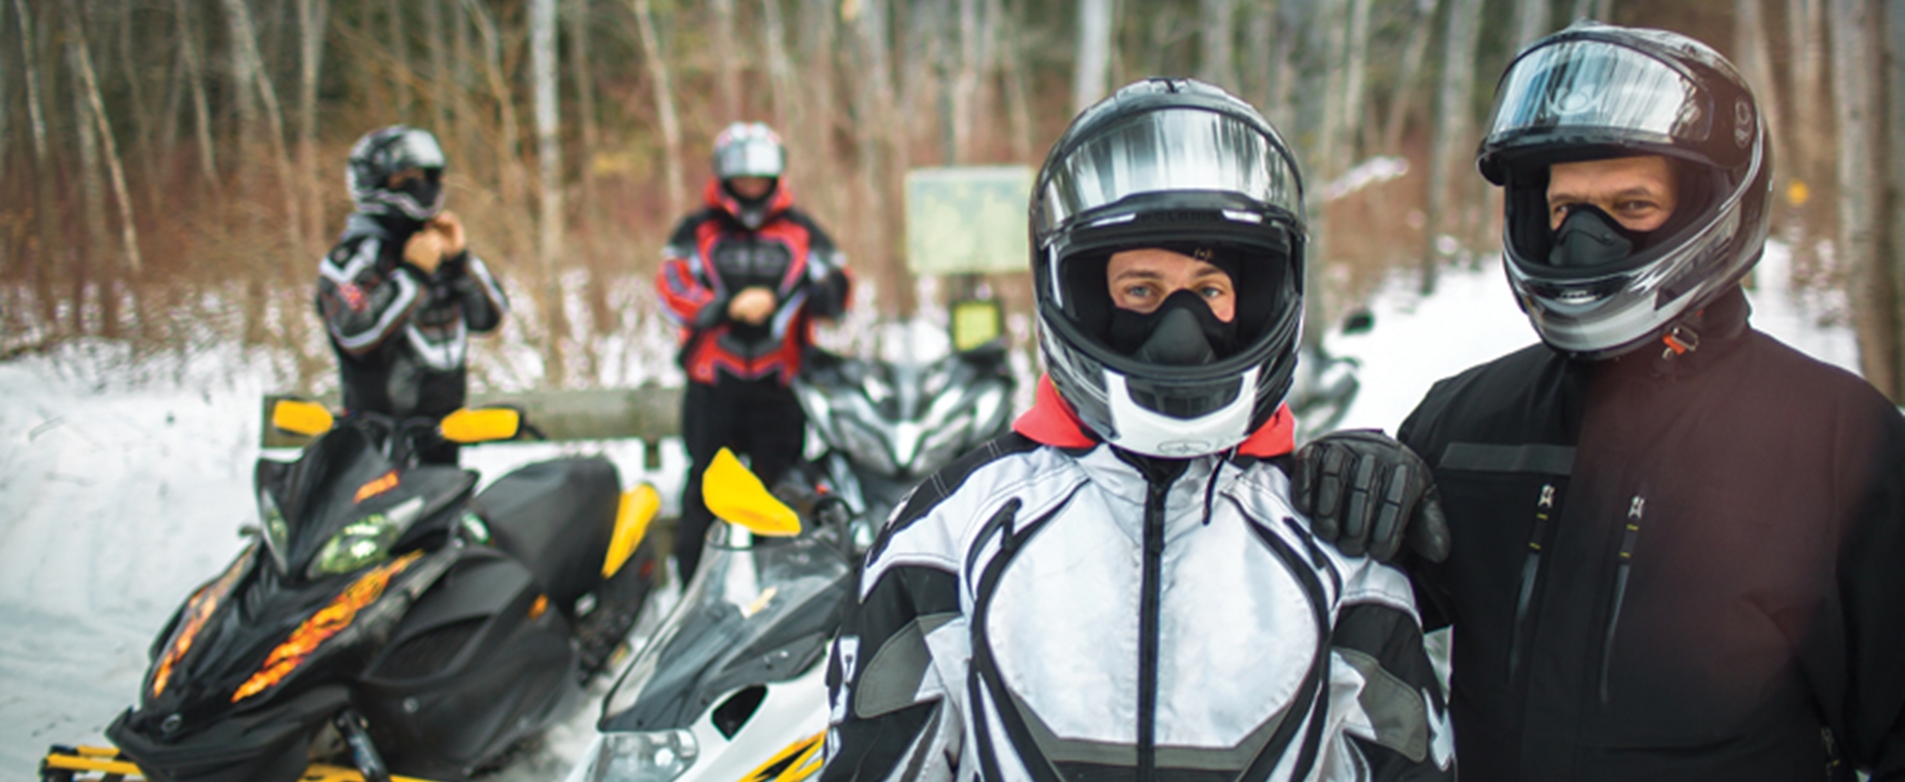 Snowmobiling Group